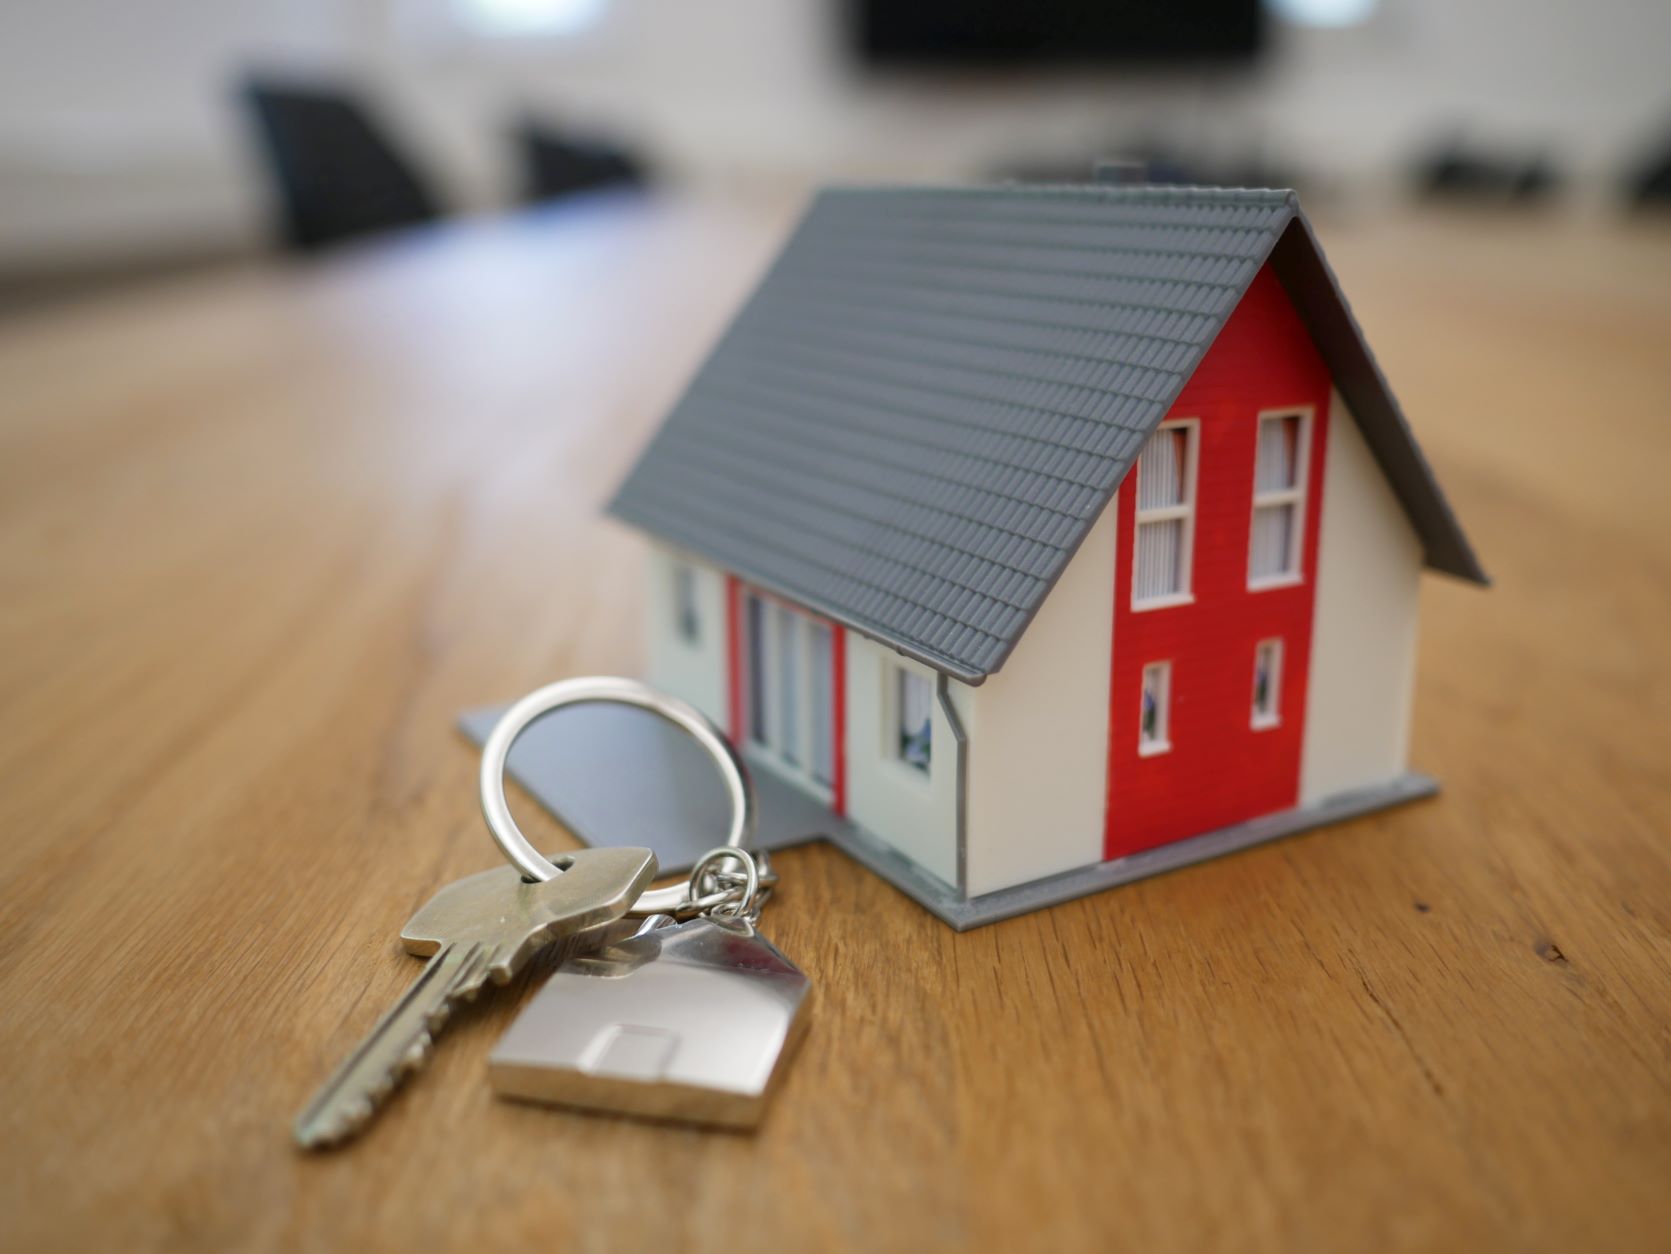 Miniature house with house keys next to it